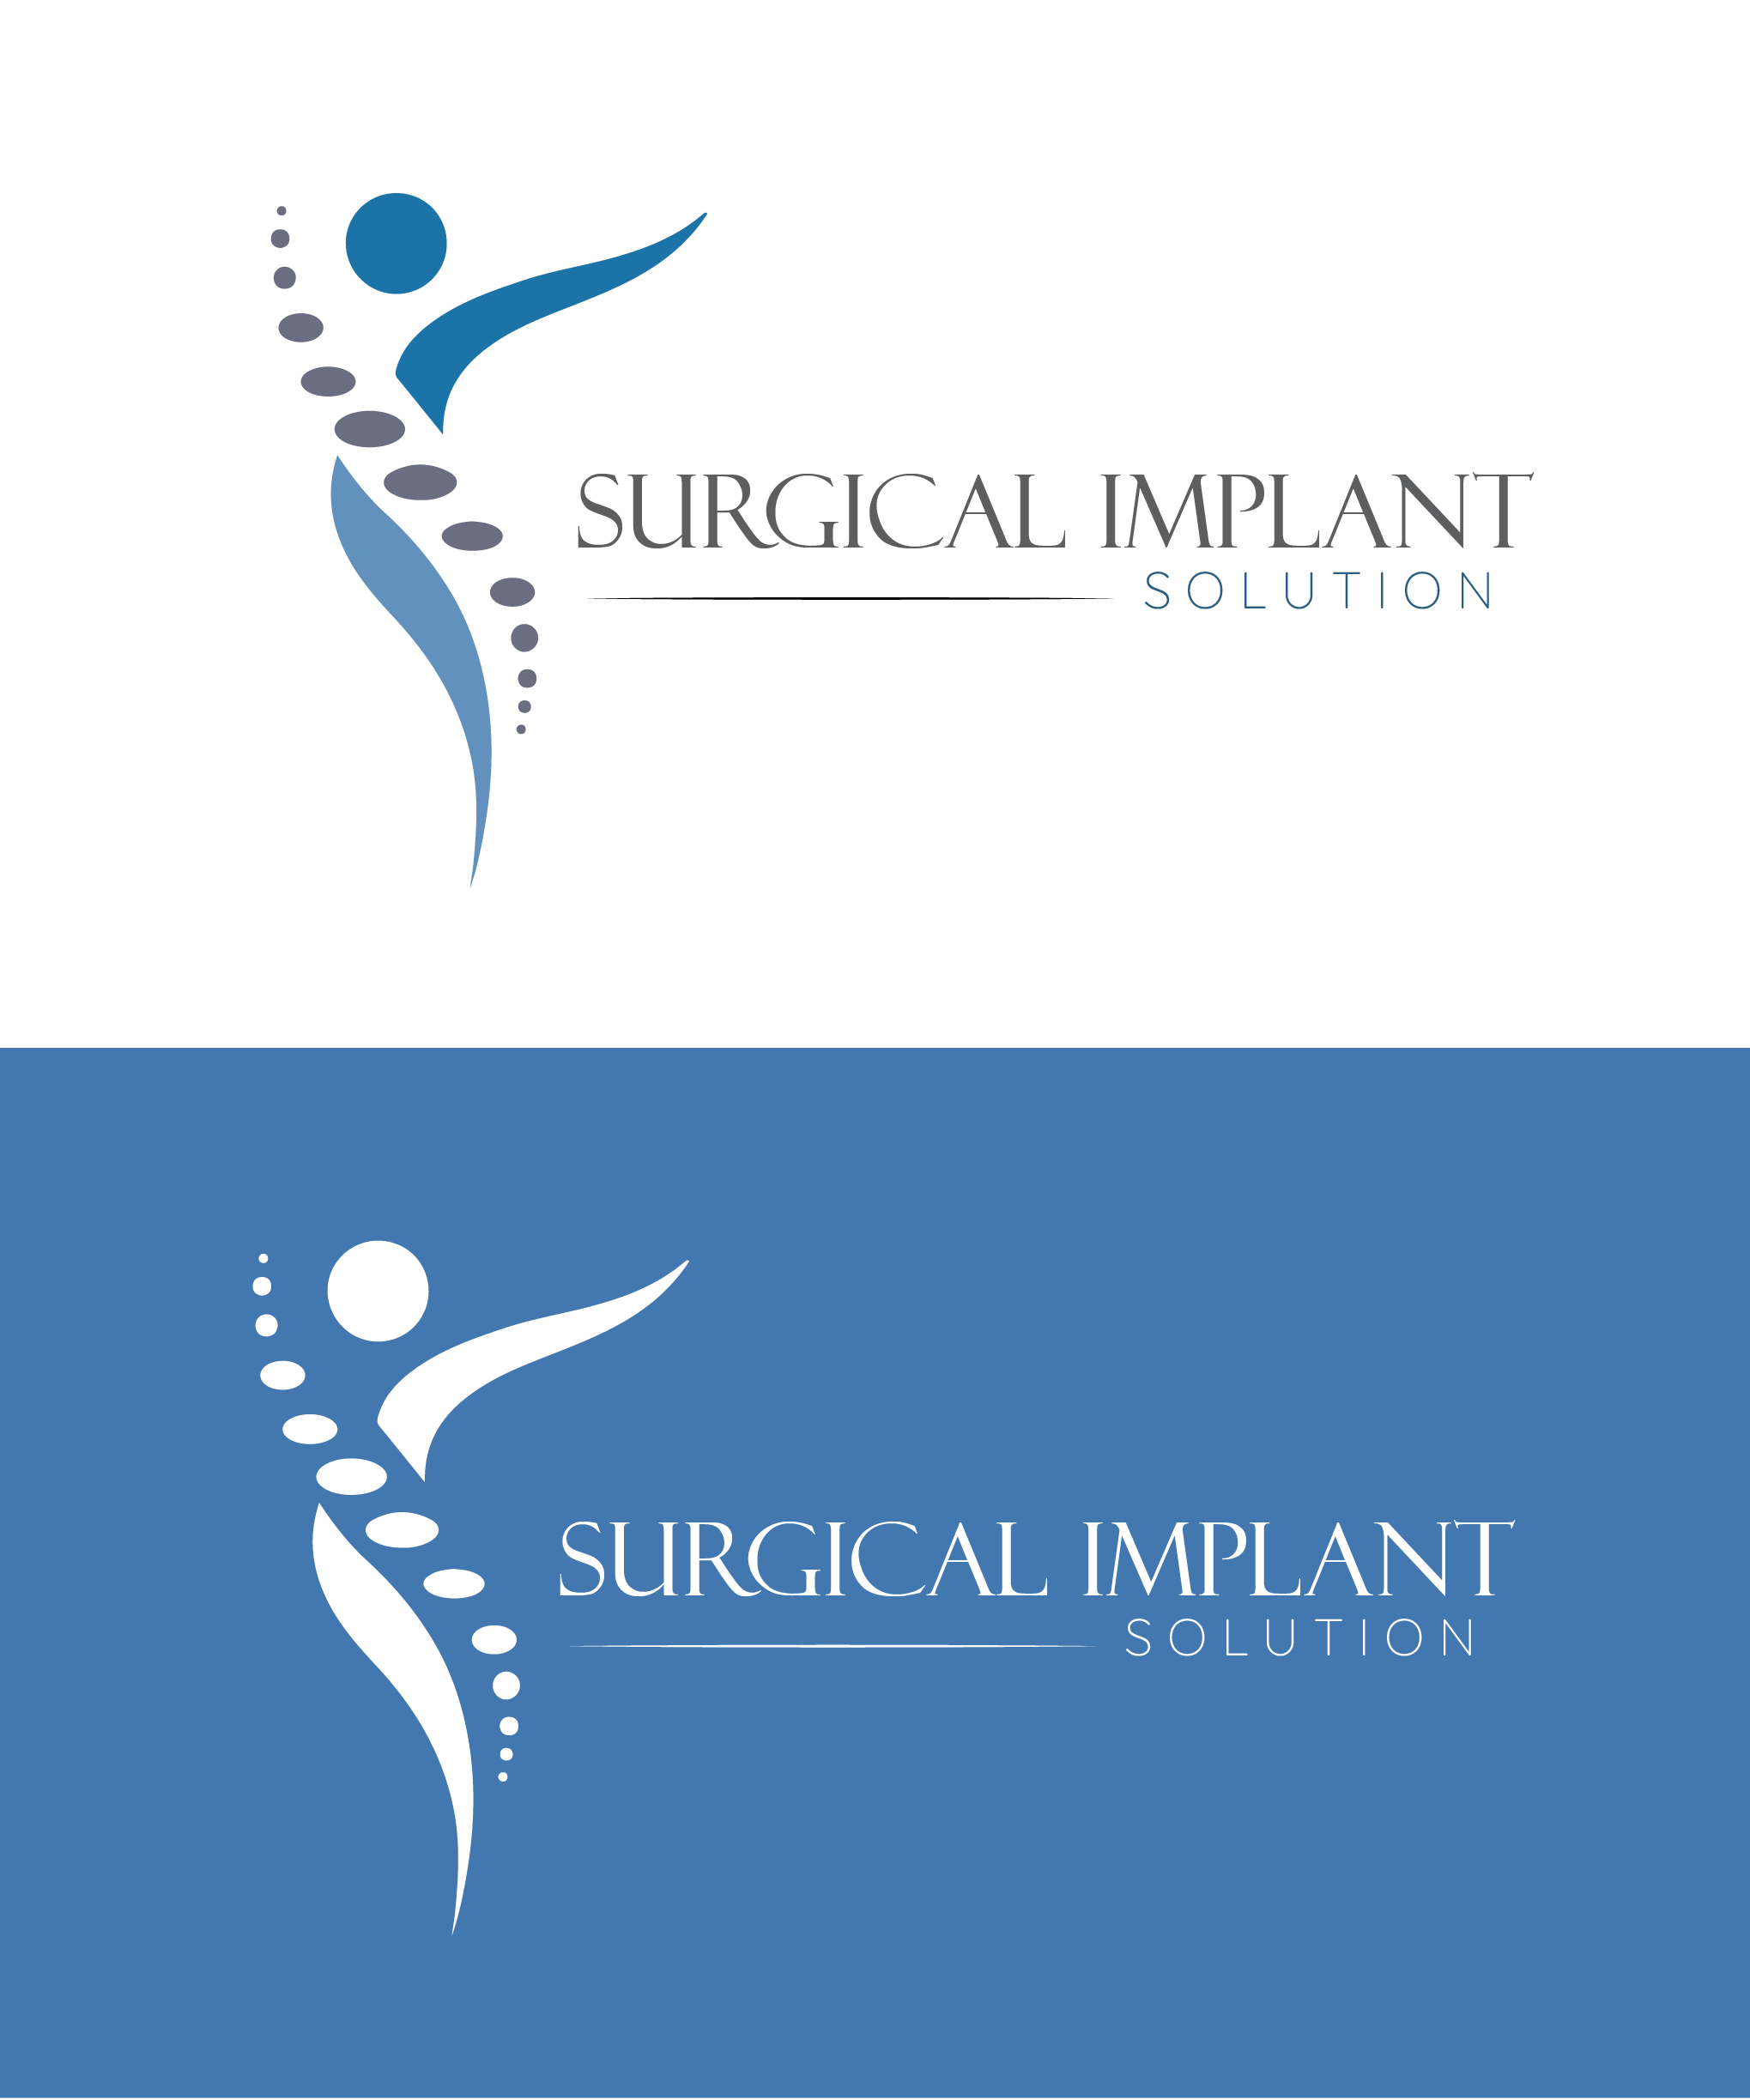 Surgical clinic logo design inspirations Vector Image